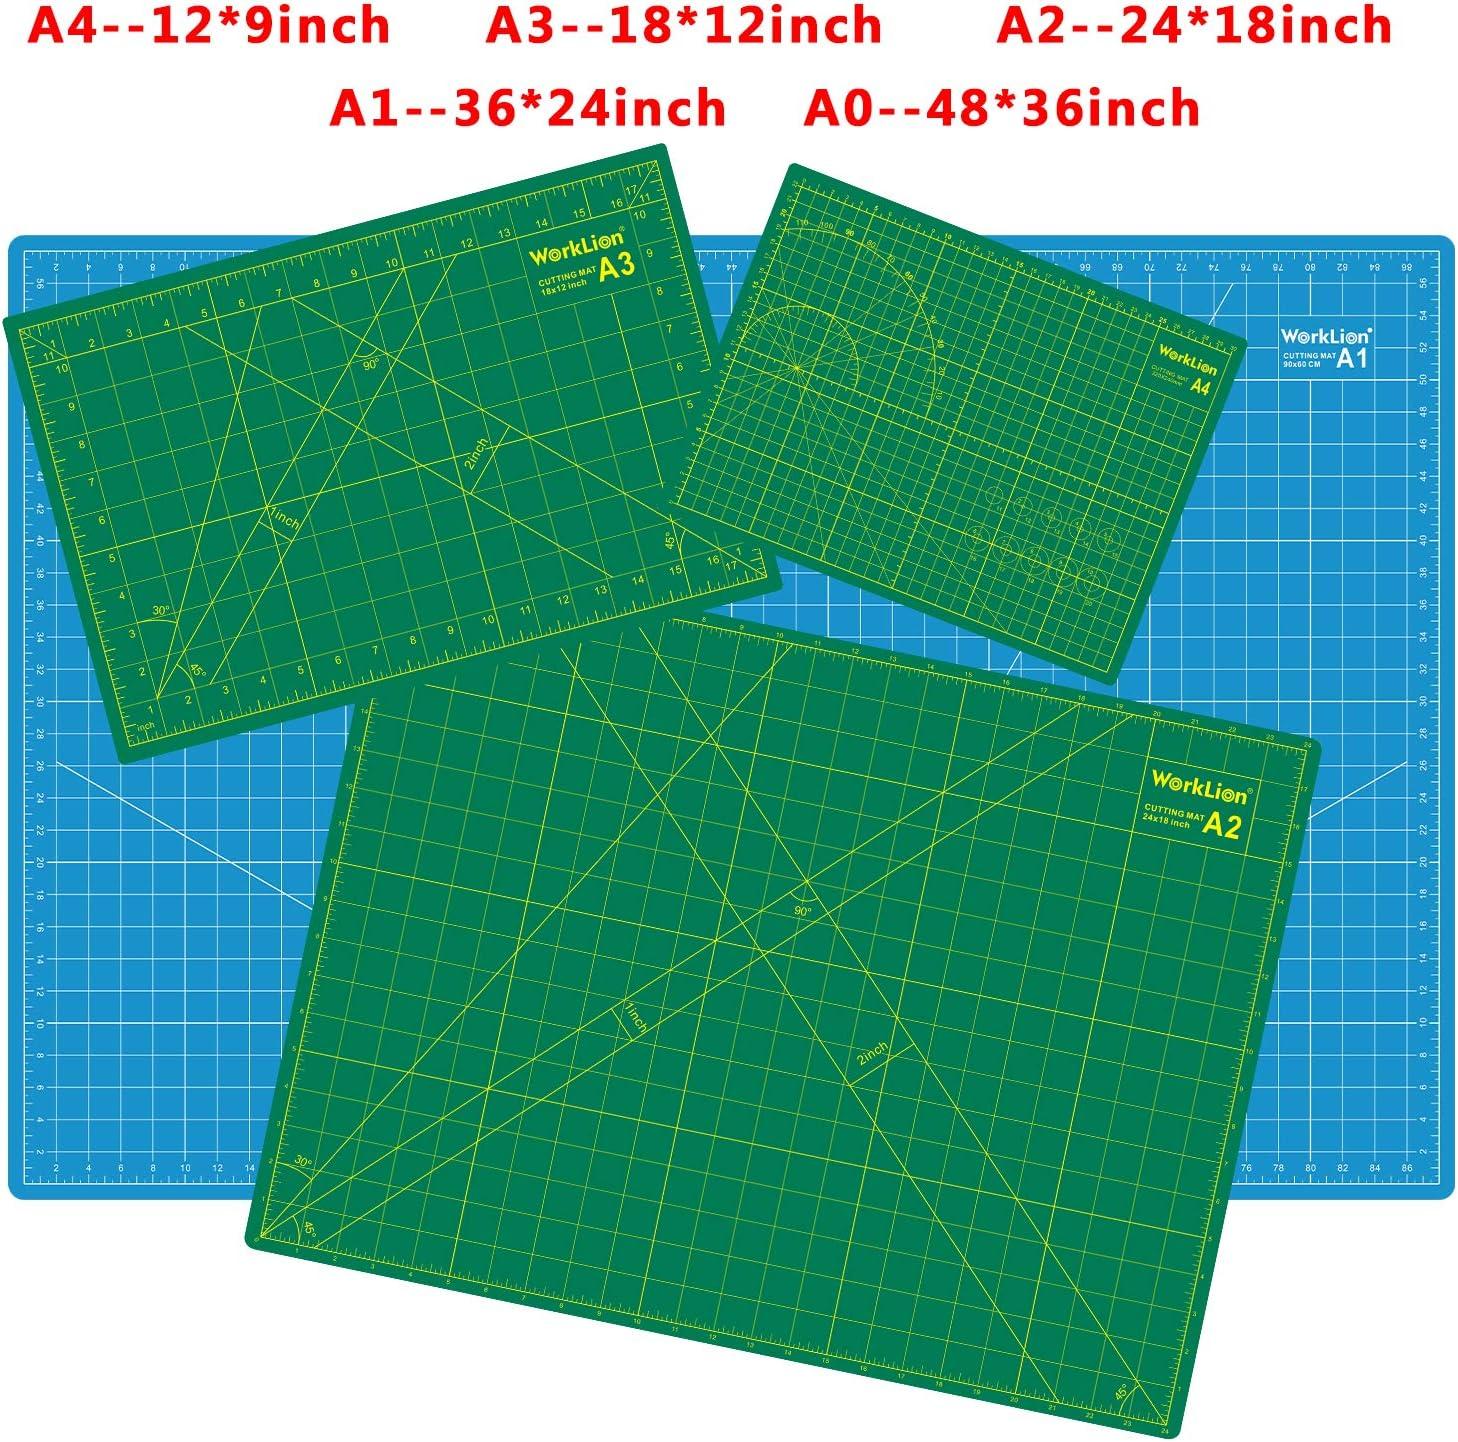 WORKLION 24 x 36 Large Self Healing PVC Cutting Mat, Double Sided,  Gridded Rotary Cutting Board for Craft, Fabric, Quilting, Sewing,  Scrapbooking - Art Project A1: Green/Blue A1:24 x 36 inch